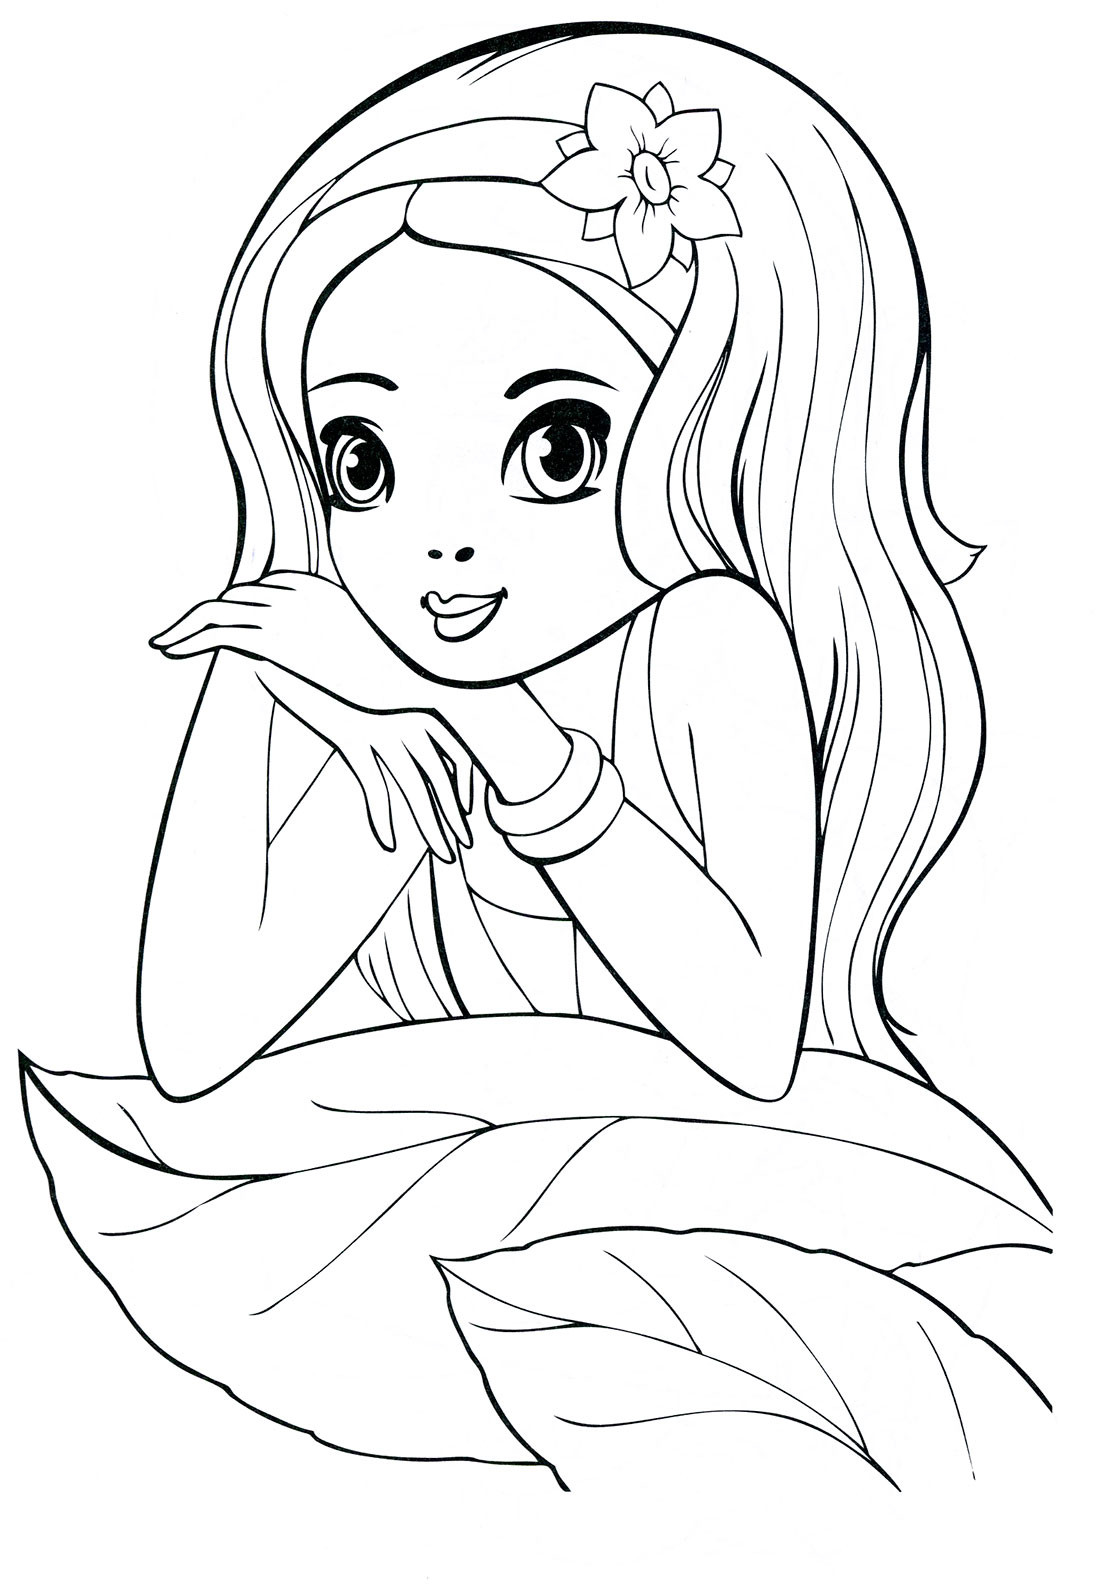 Girls Printable Coloring Pages
 Coloring pages for 8 9 10 year old girls to and